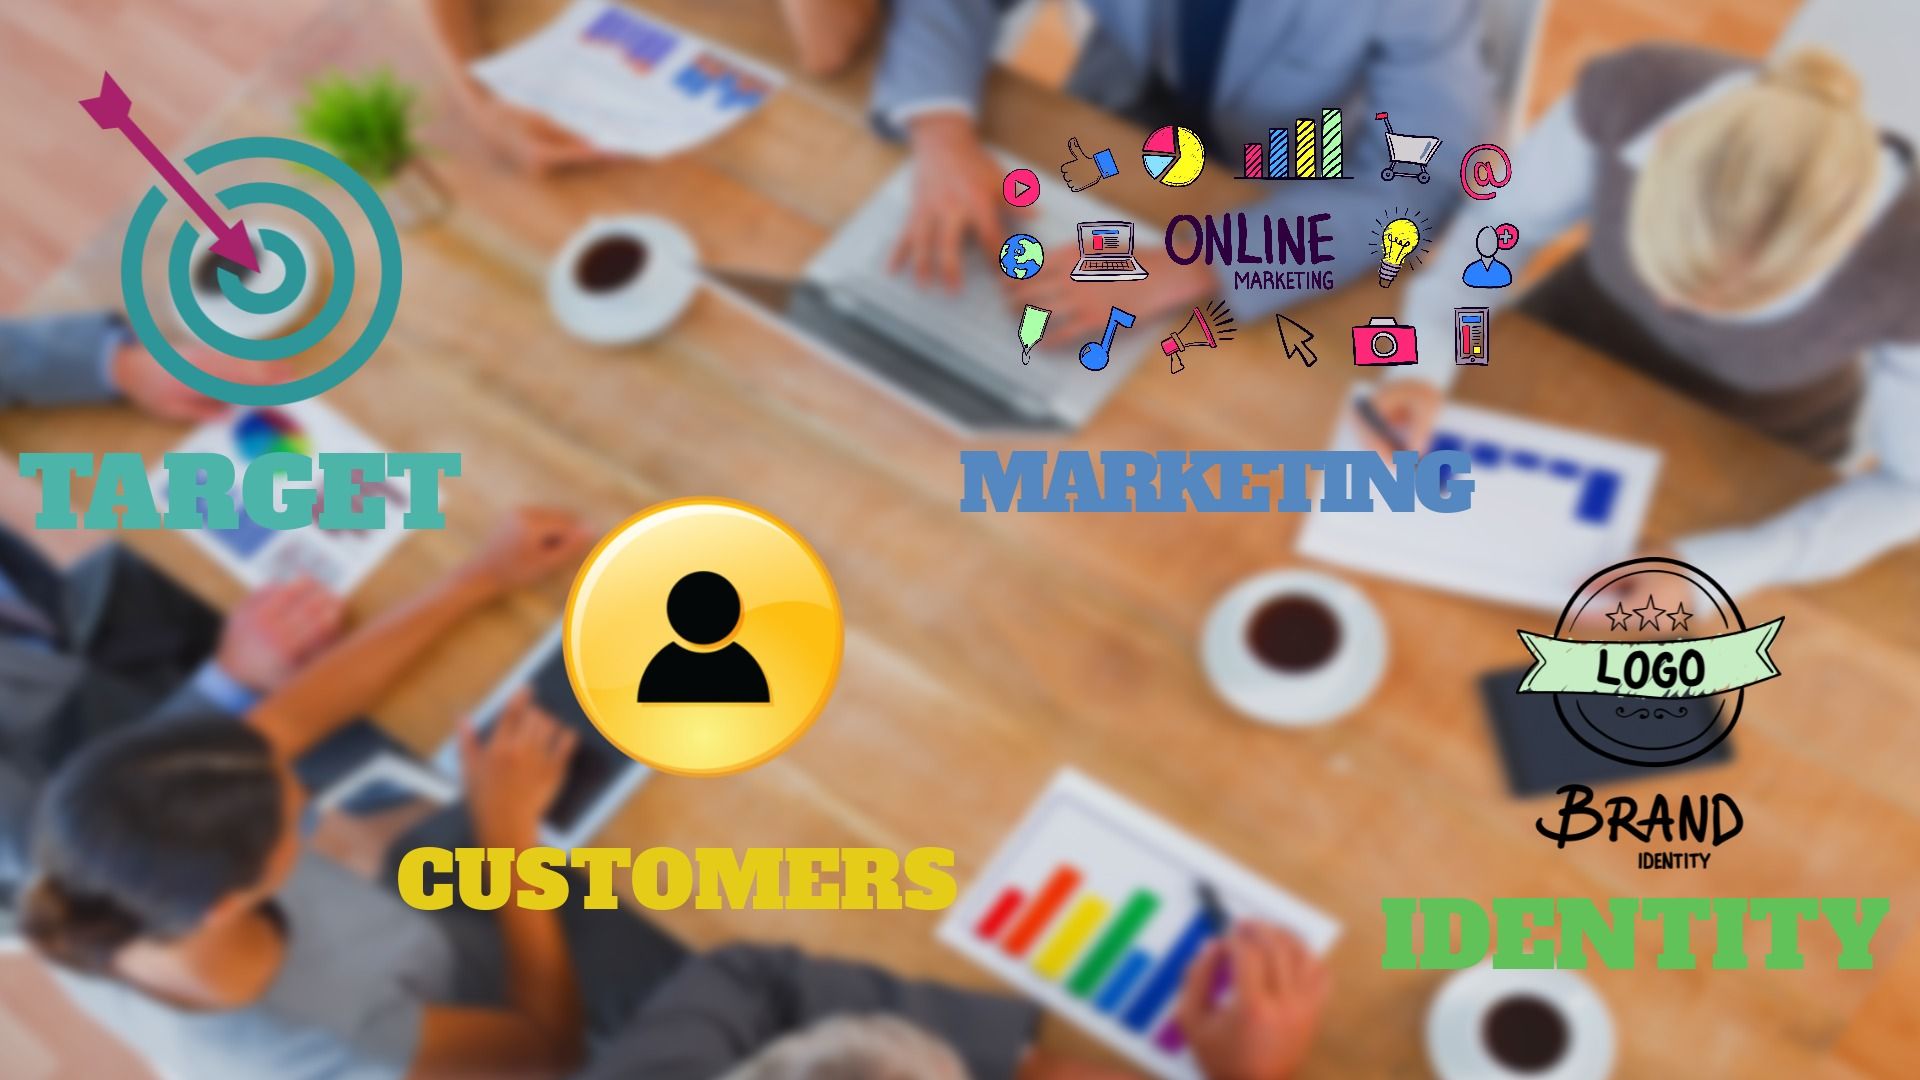 Text Target, Customers, Marketing, Identity on a blurred background of people in a business meeting - Product position: why is it important - Image